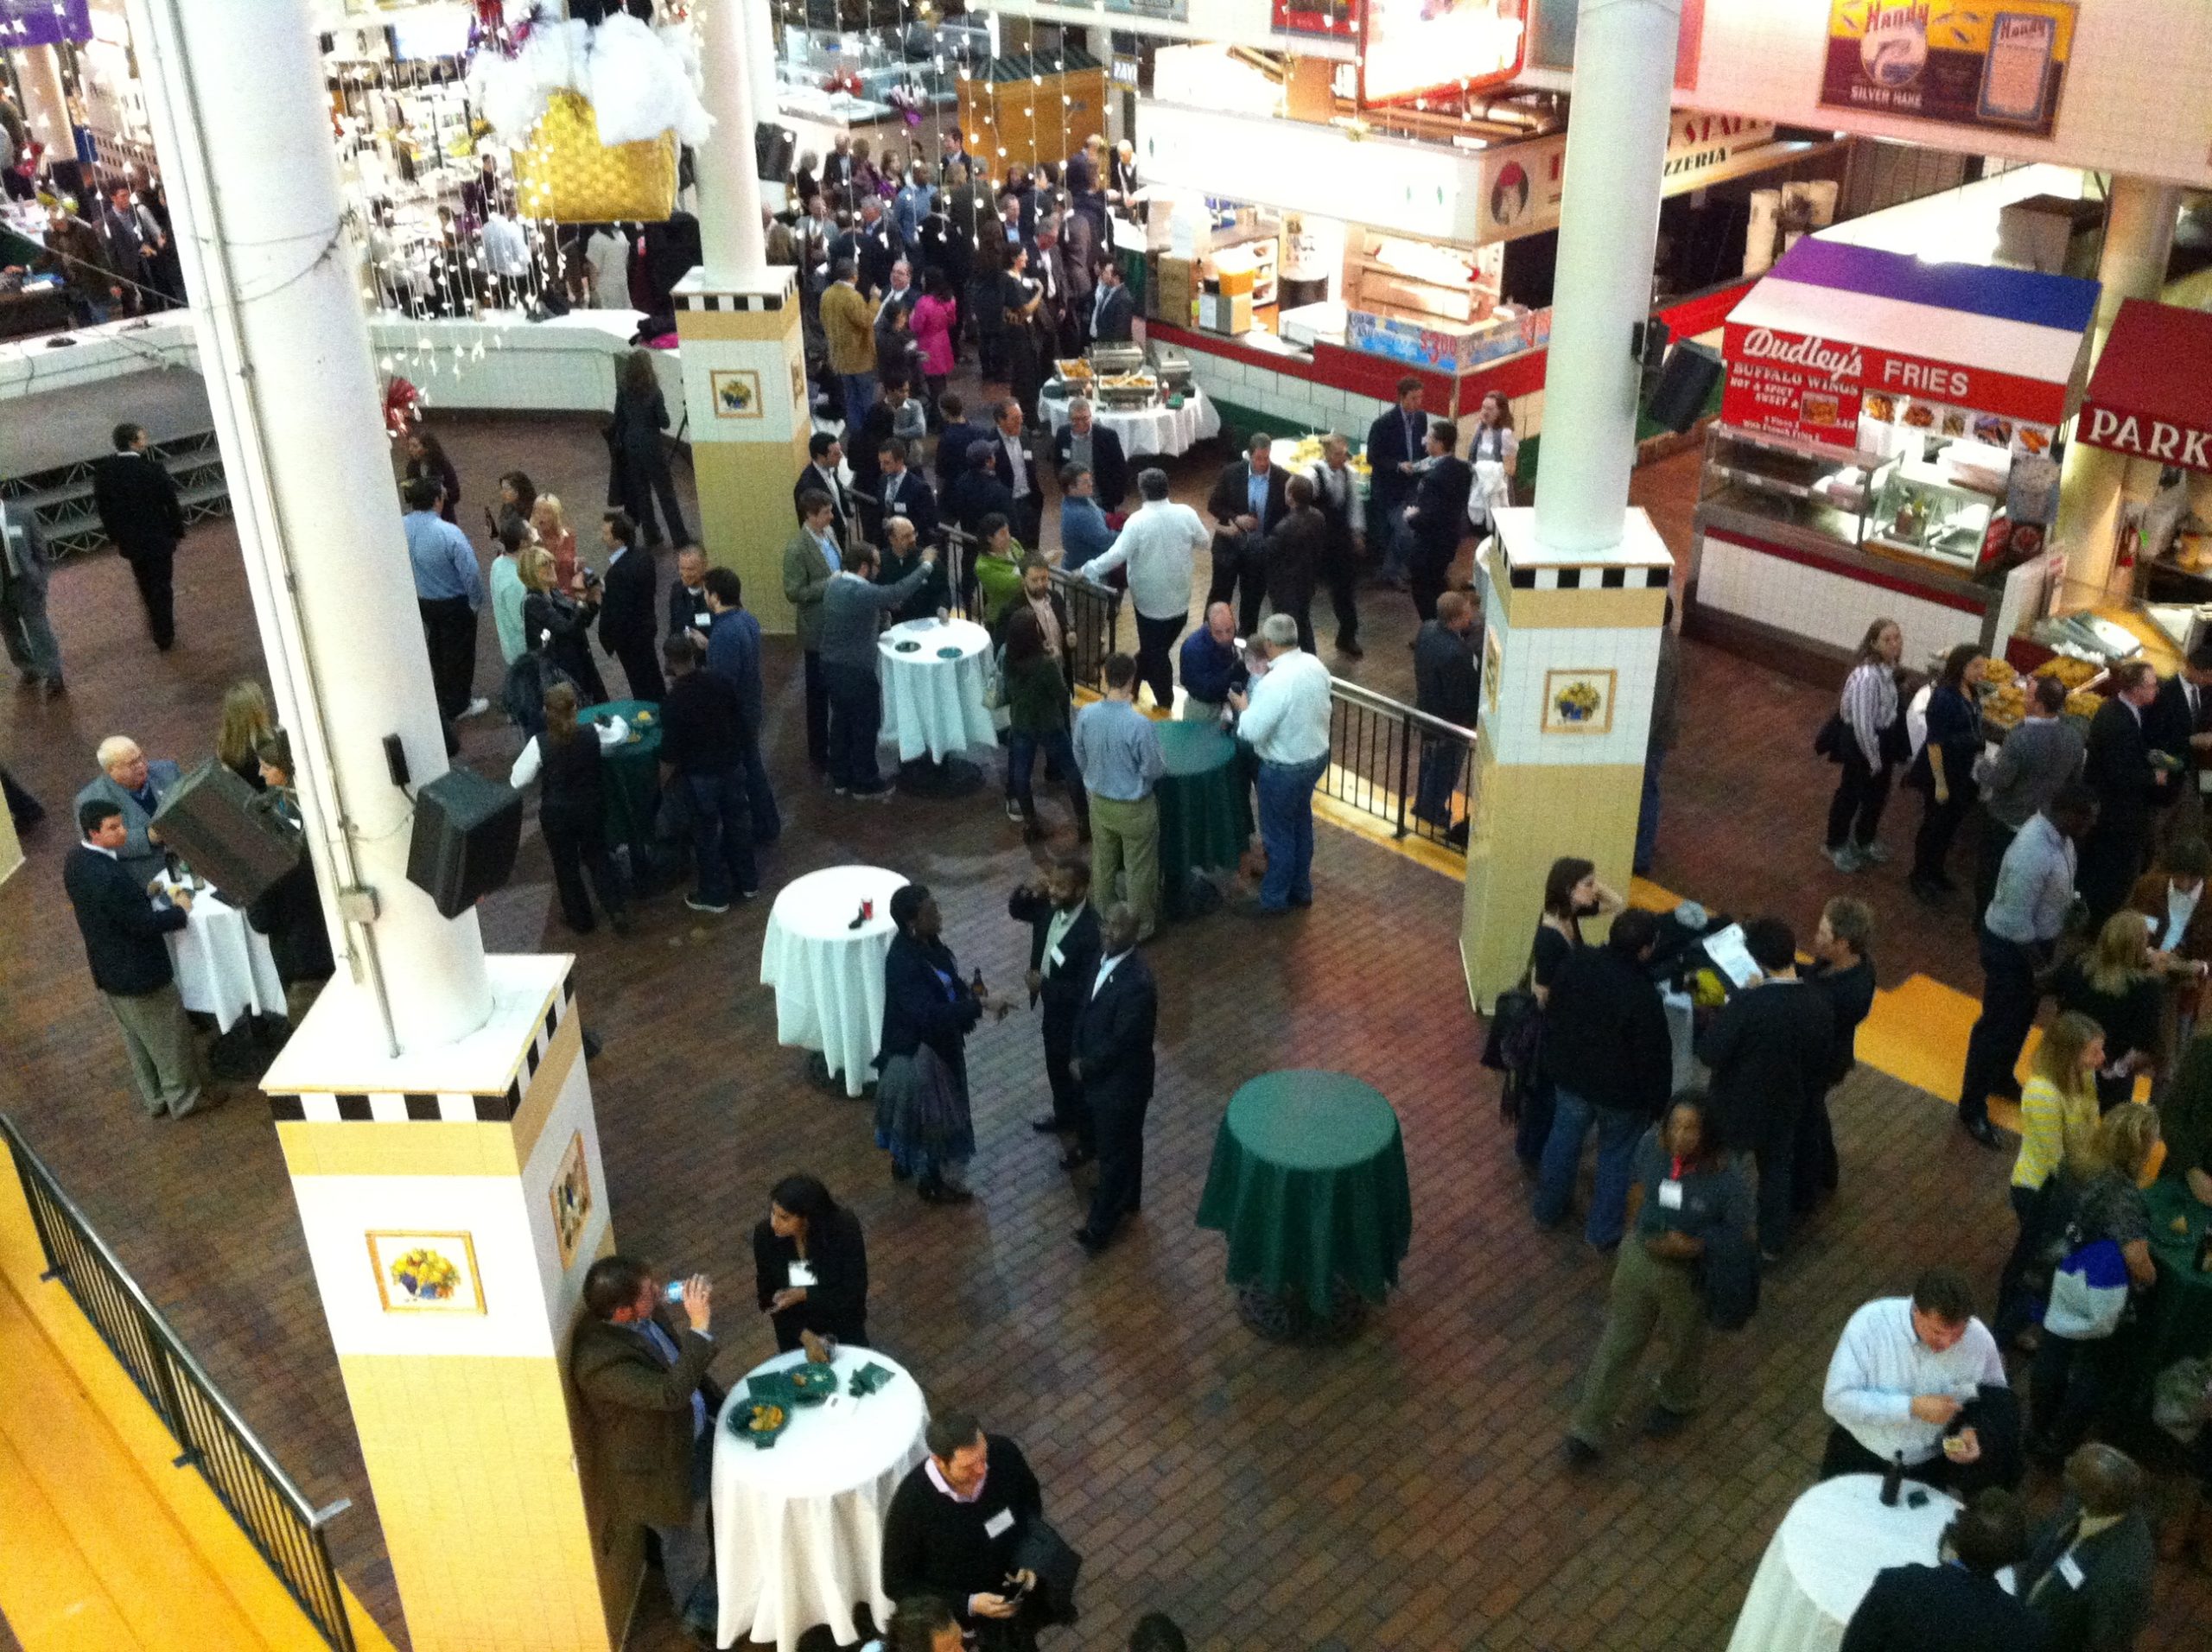 The scene at Tech Night 2012, which was held at Lexington Market.